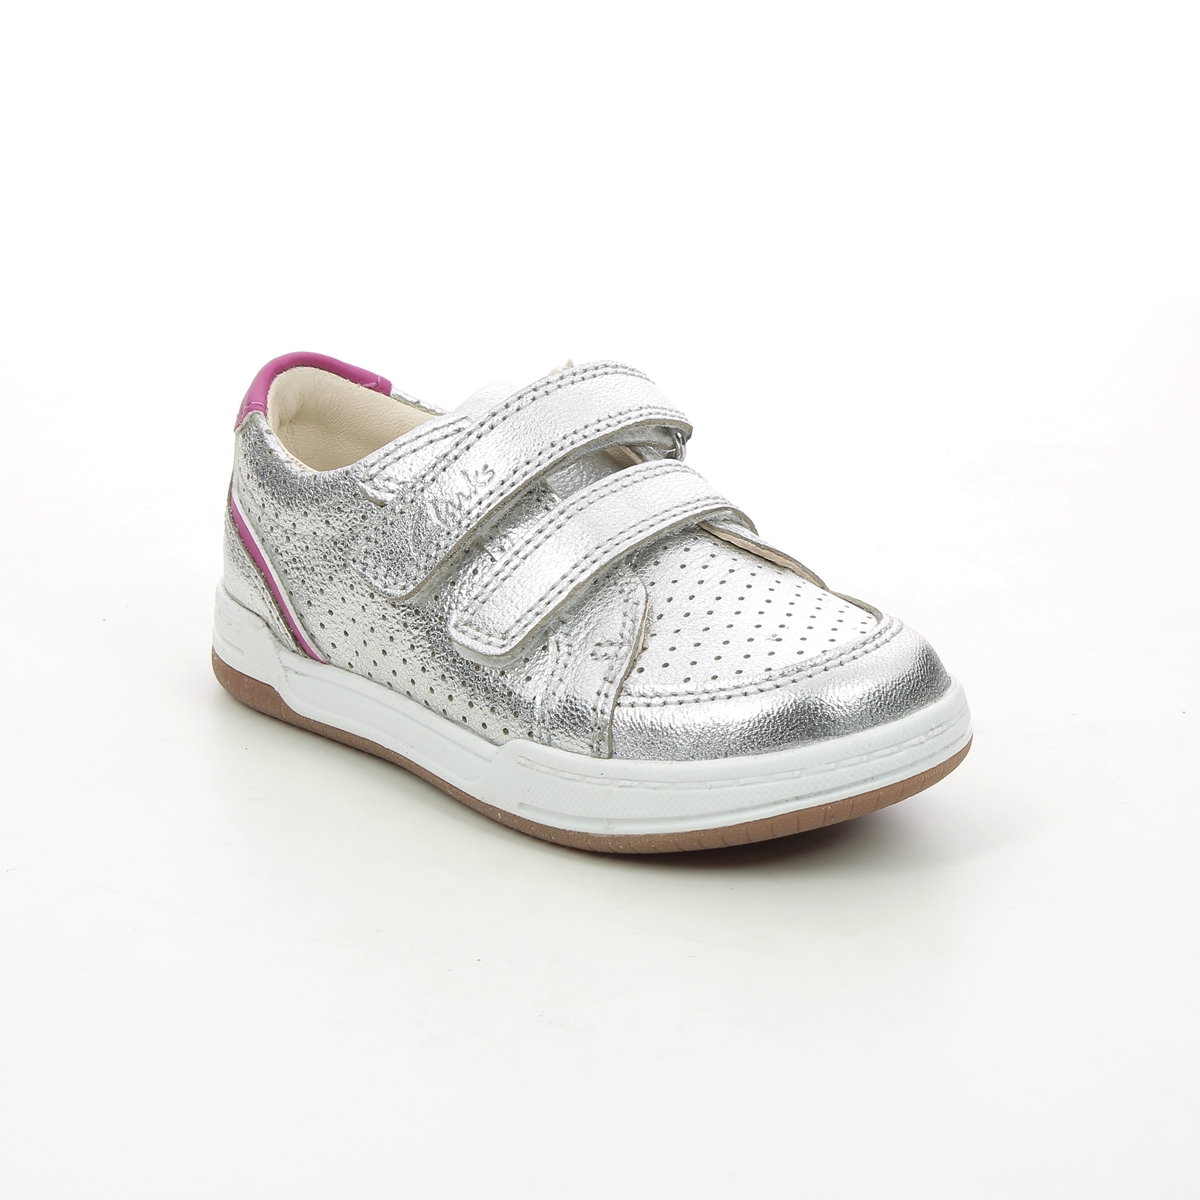 Clarks Fawn Solo T Silver Kids First And Toddler 624606F In Size 8 In Plain Silver F Width Fitting Regular Fit For kids